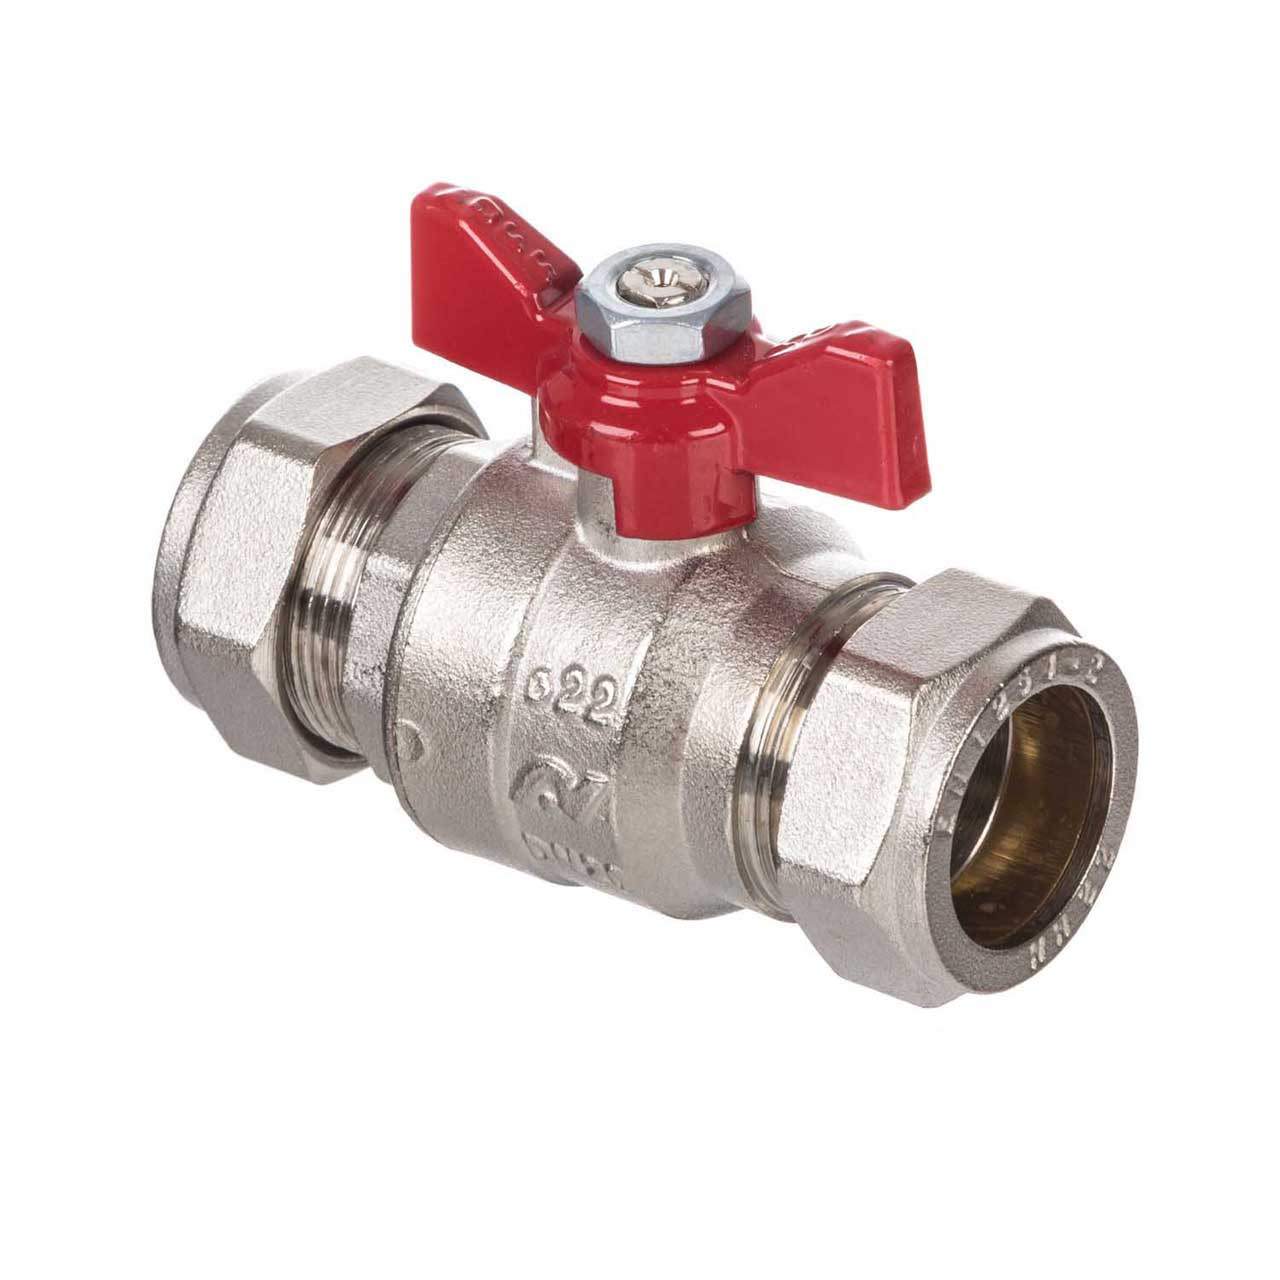 Photograph of Altecnic 15mm Butterfly Red Handle Ball Valve